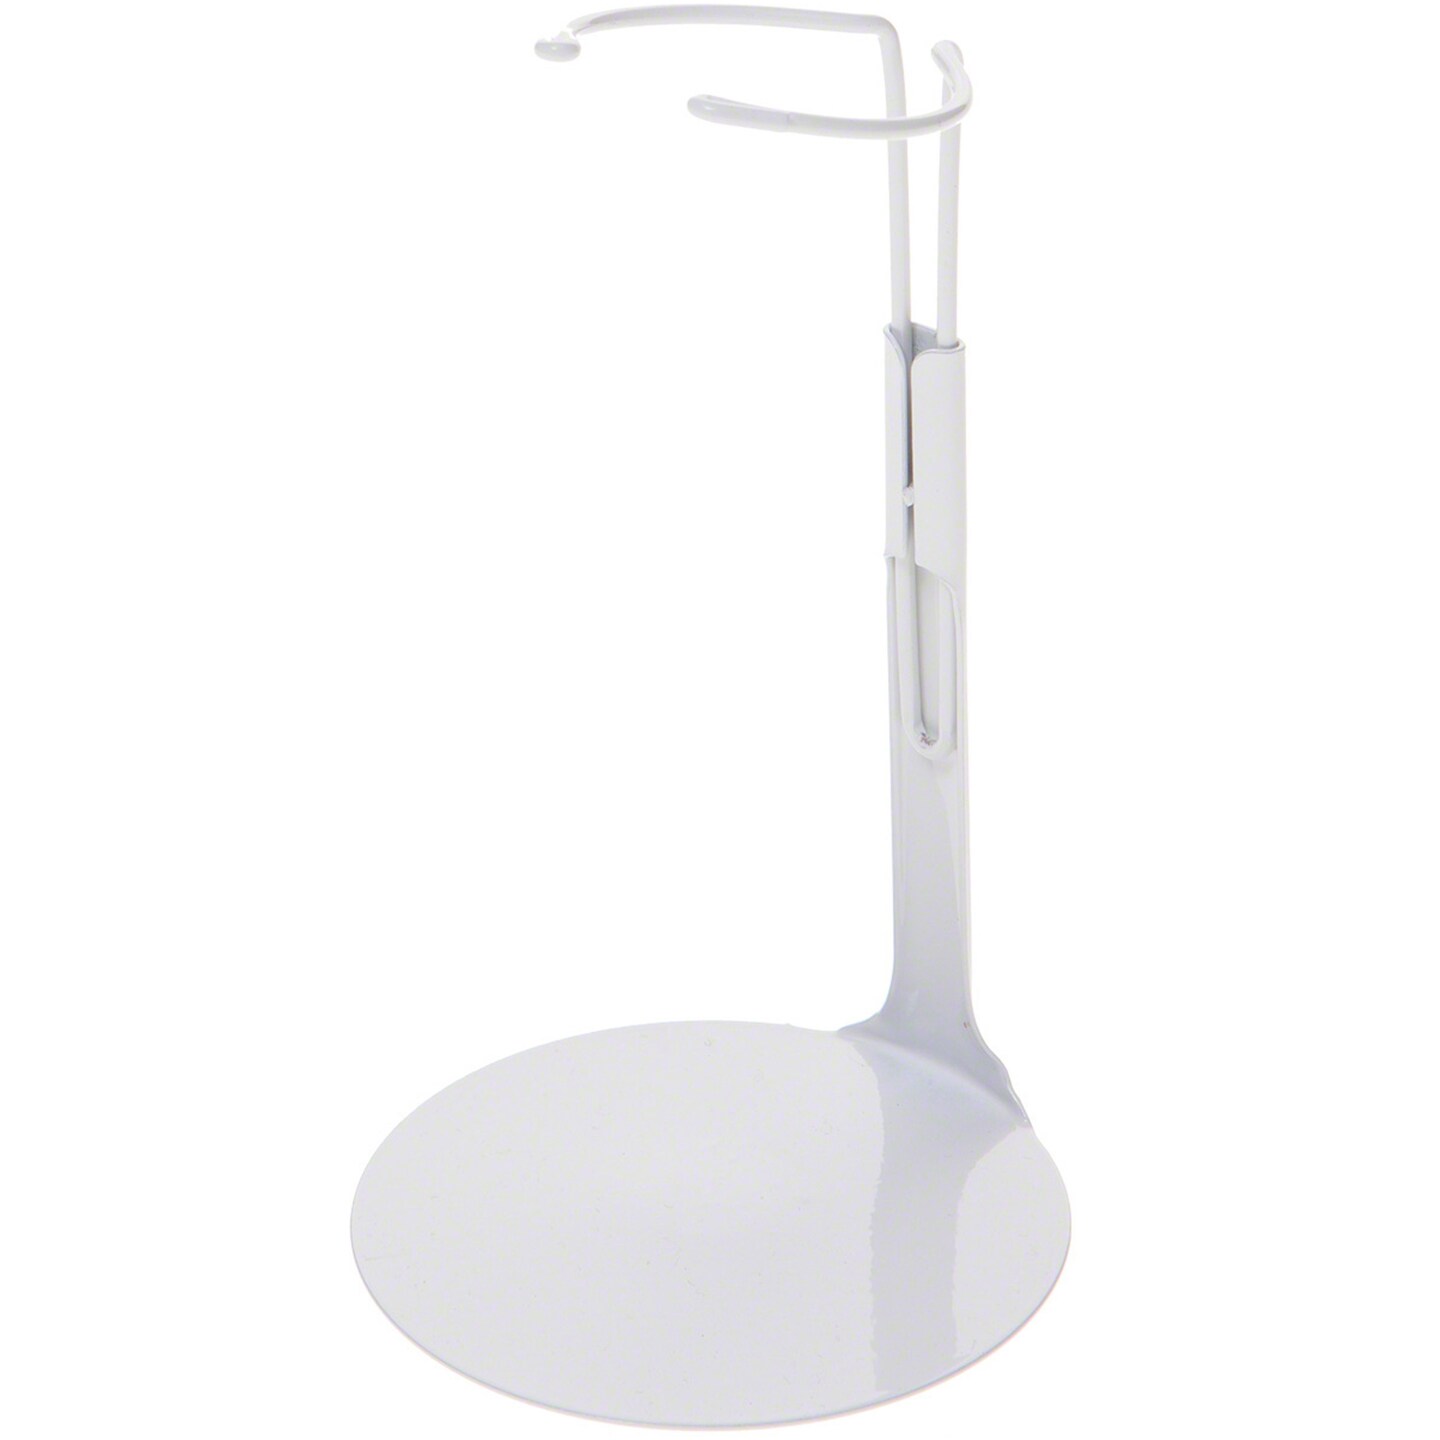 Kaiser 2001 White Adjustable Doll Stand, fits 6.5 to 11 inch Dolls or Action Figures, waist width adjusts from 1.375 to 1.75 inches